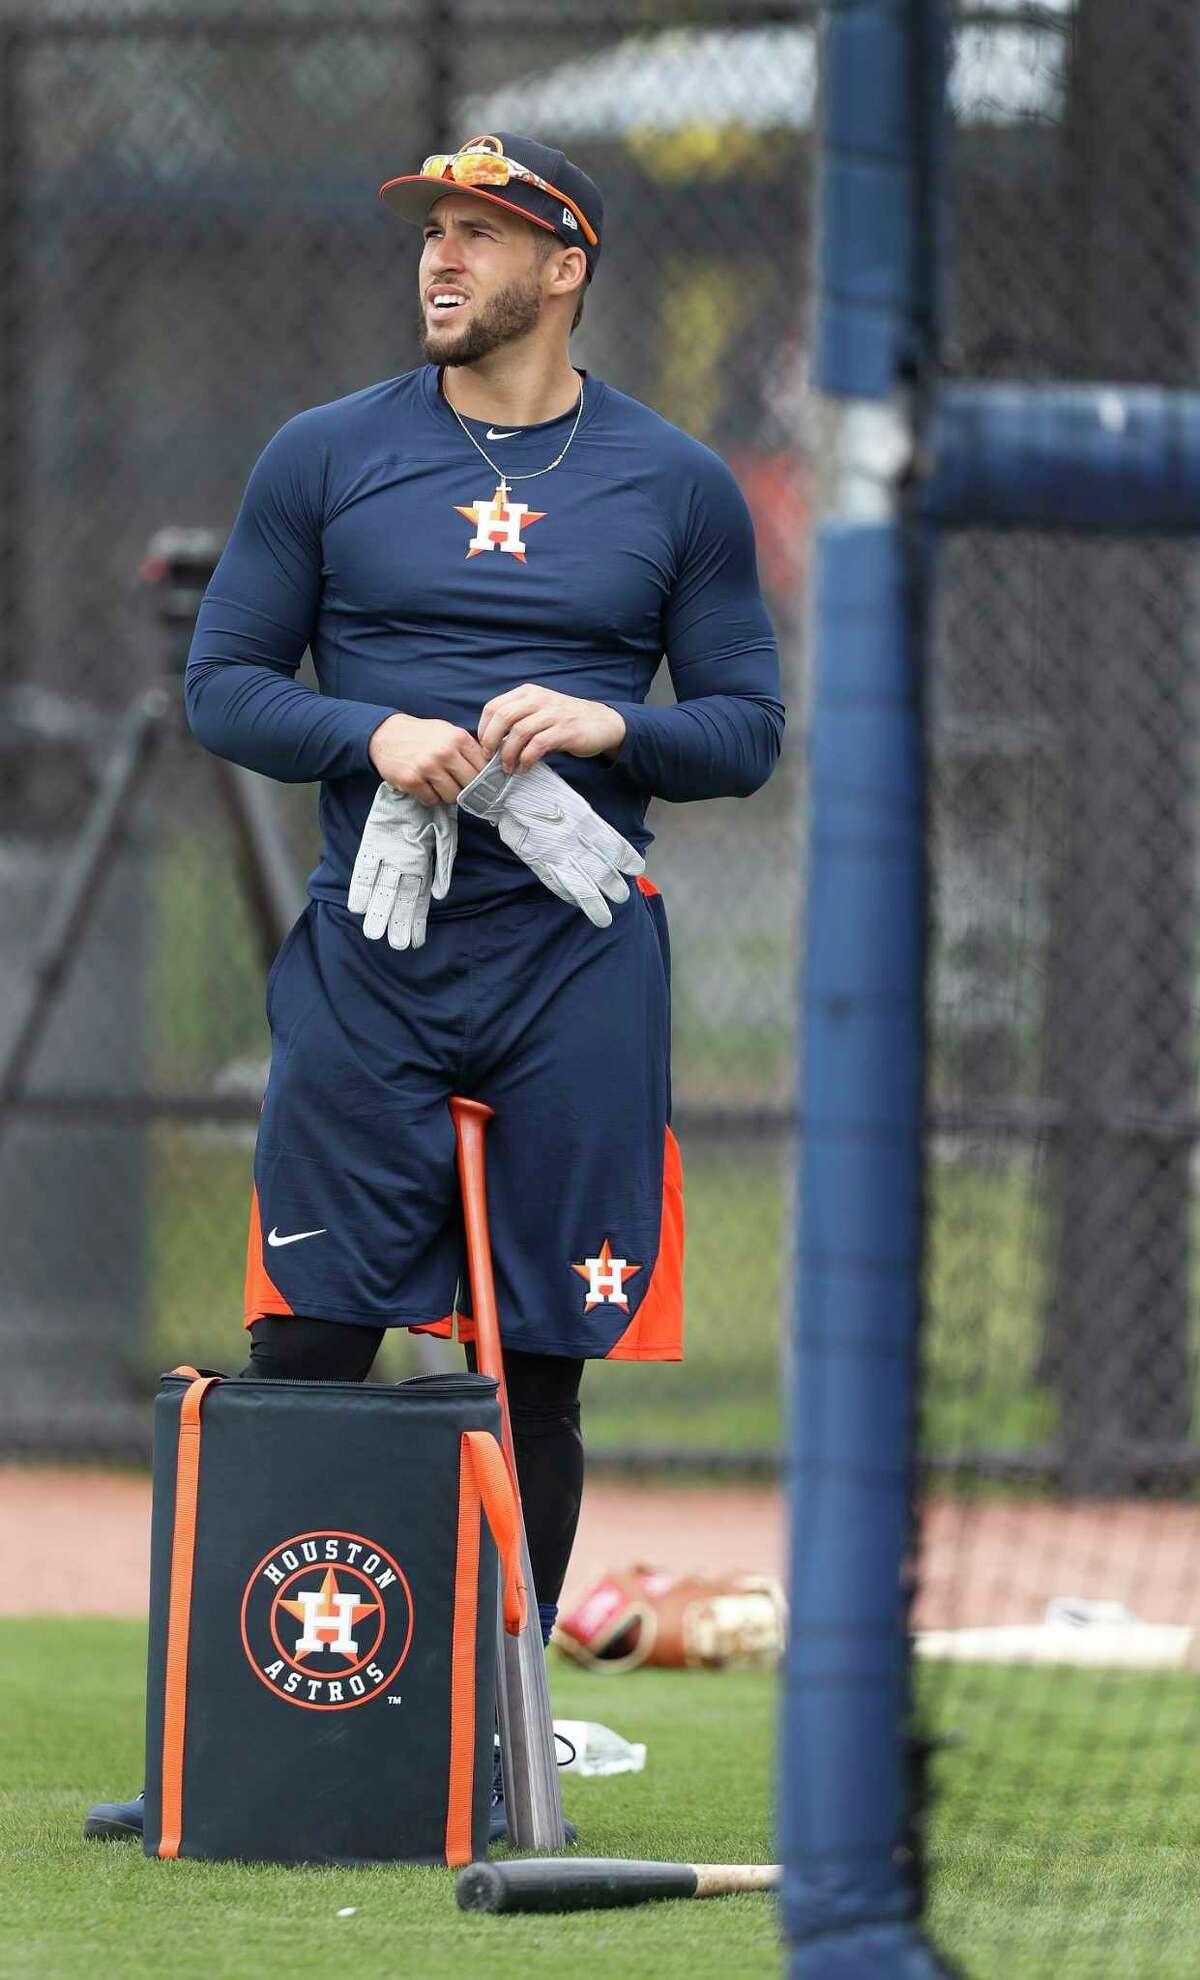 Houston Astros right fielder George Springer gets ready to bat as he worked out with the other position players who came to camp early during spring training at The Ballpark of the Palm Beaches, in West Palm Beach, Florida, Thursday, February 16, 2017. ( Karen Warren / Houston Chronicle )